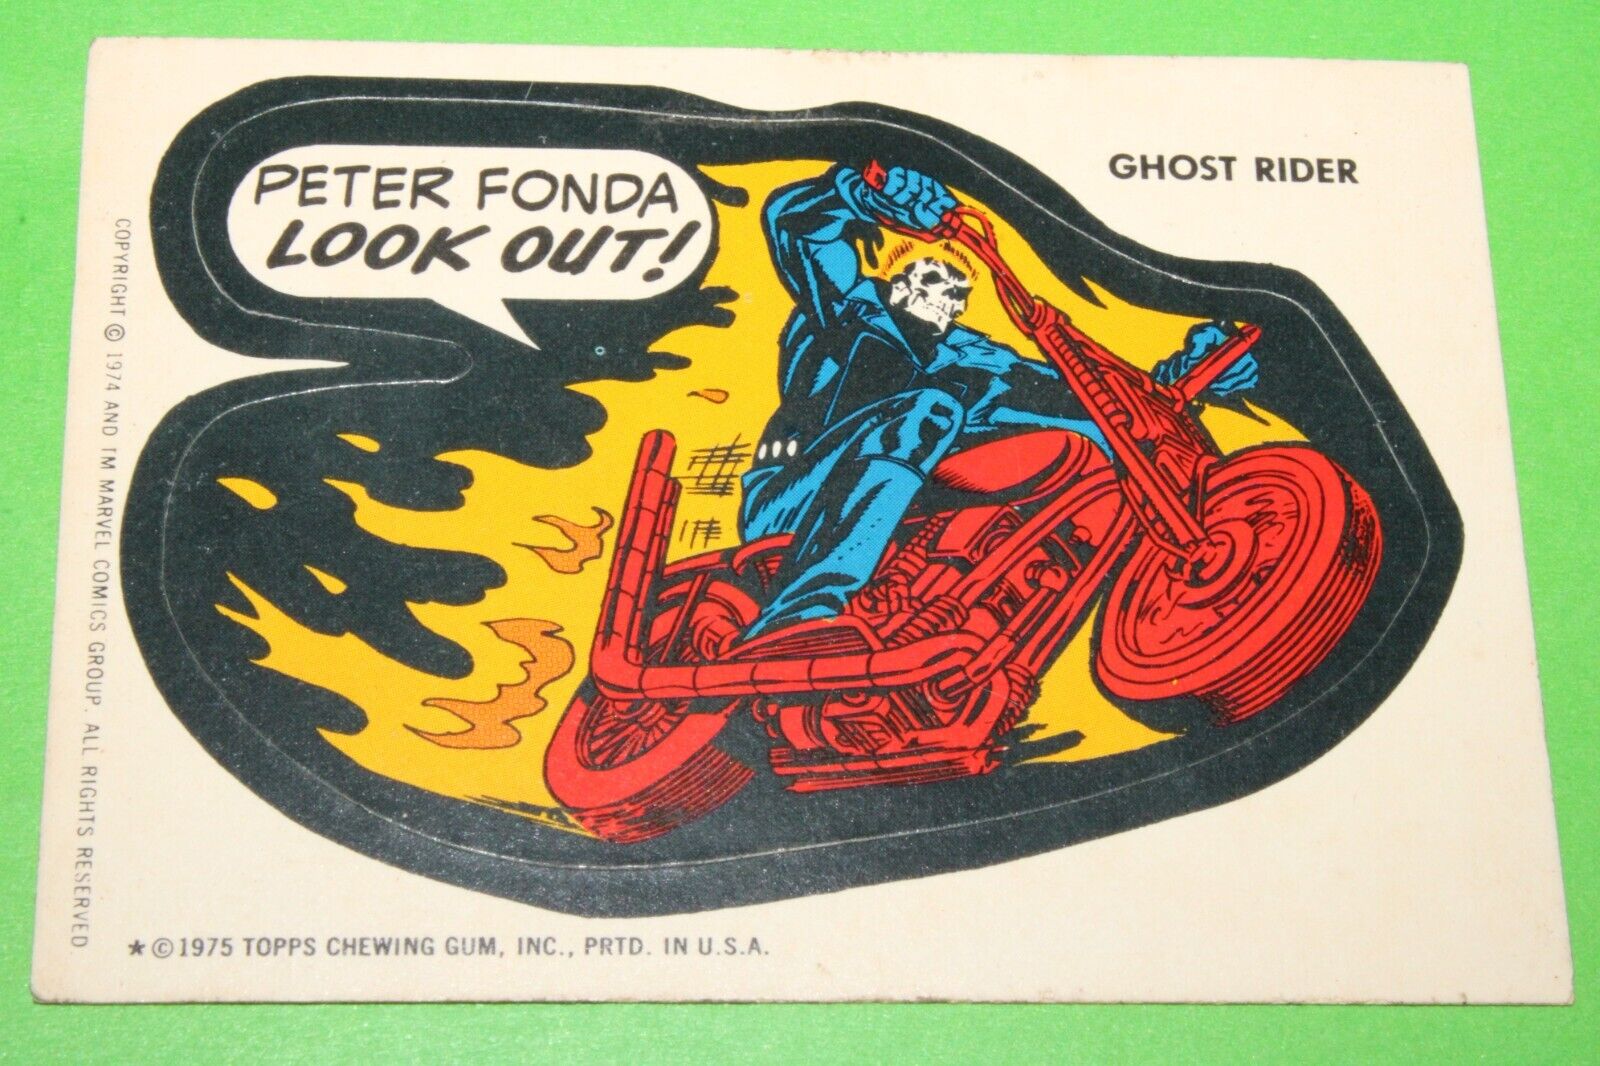 1974 1975 TOPPS MARVEL SUPER HEROES STICKERS GHOST RIDER PETER FONDA LOOK OUT